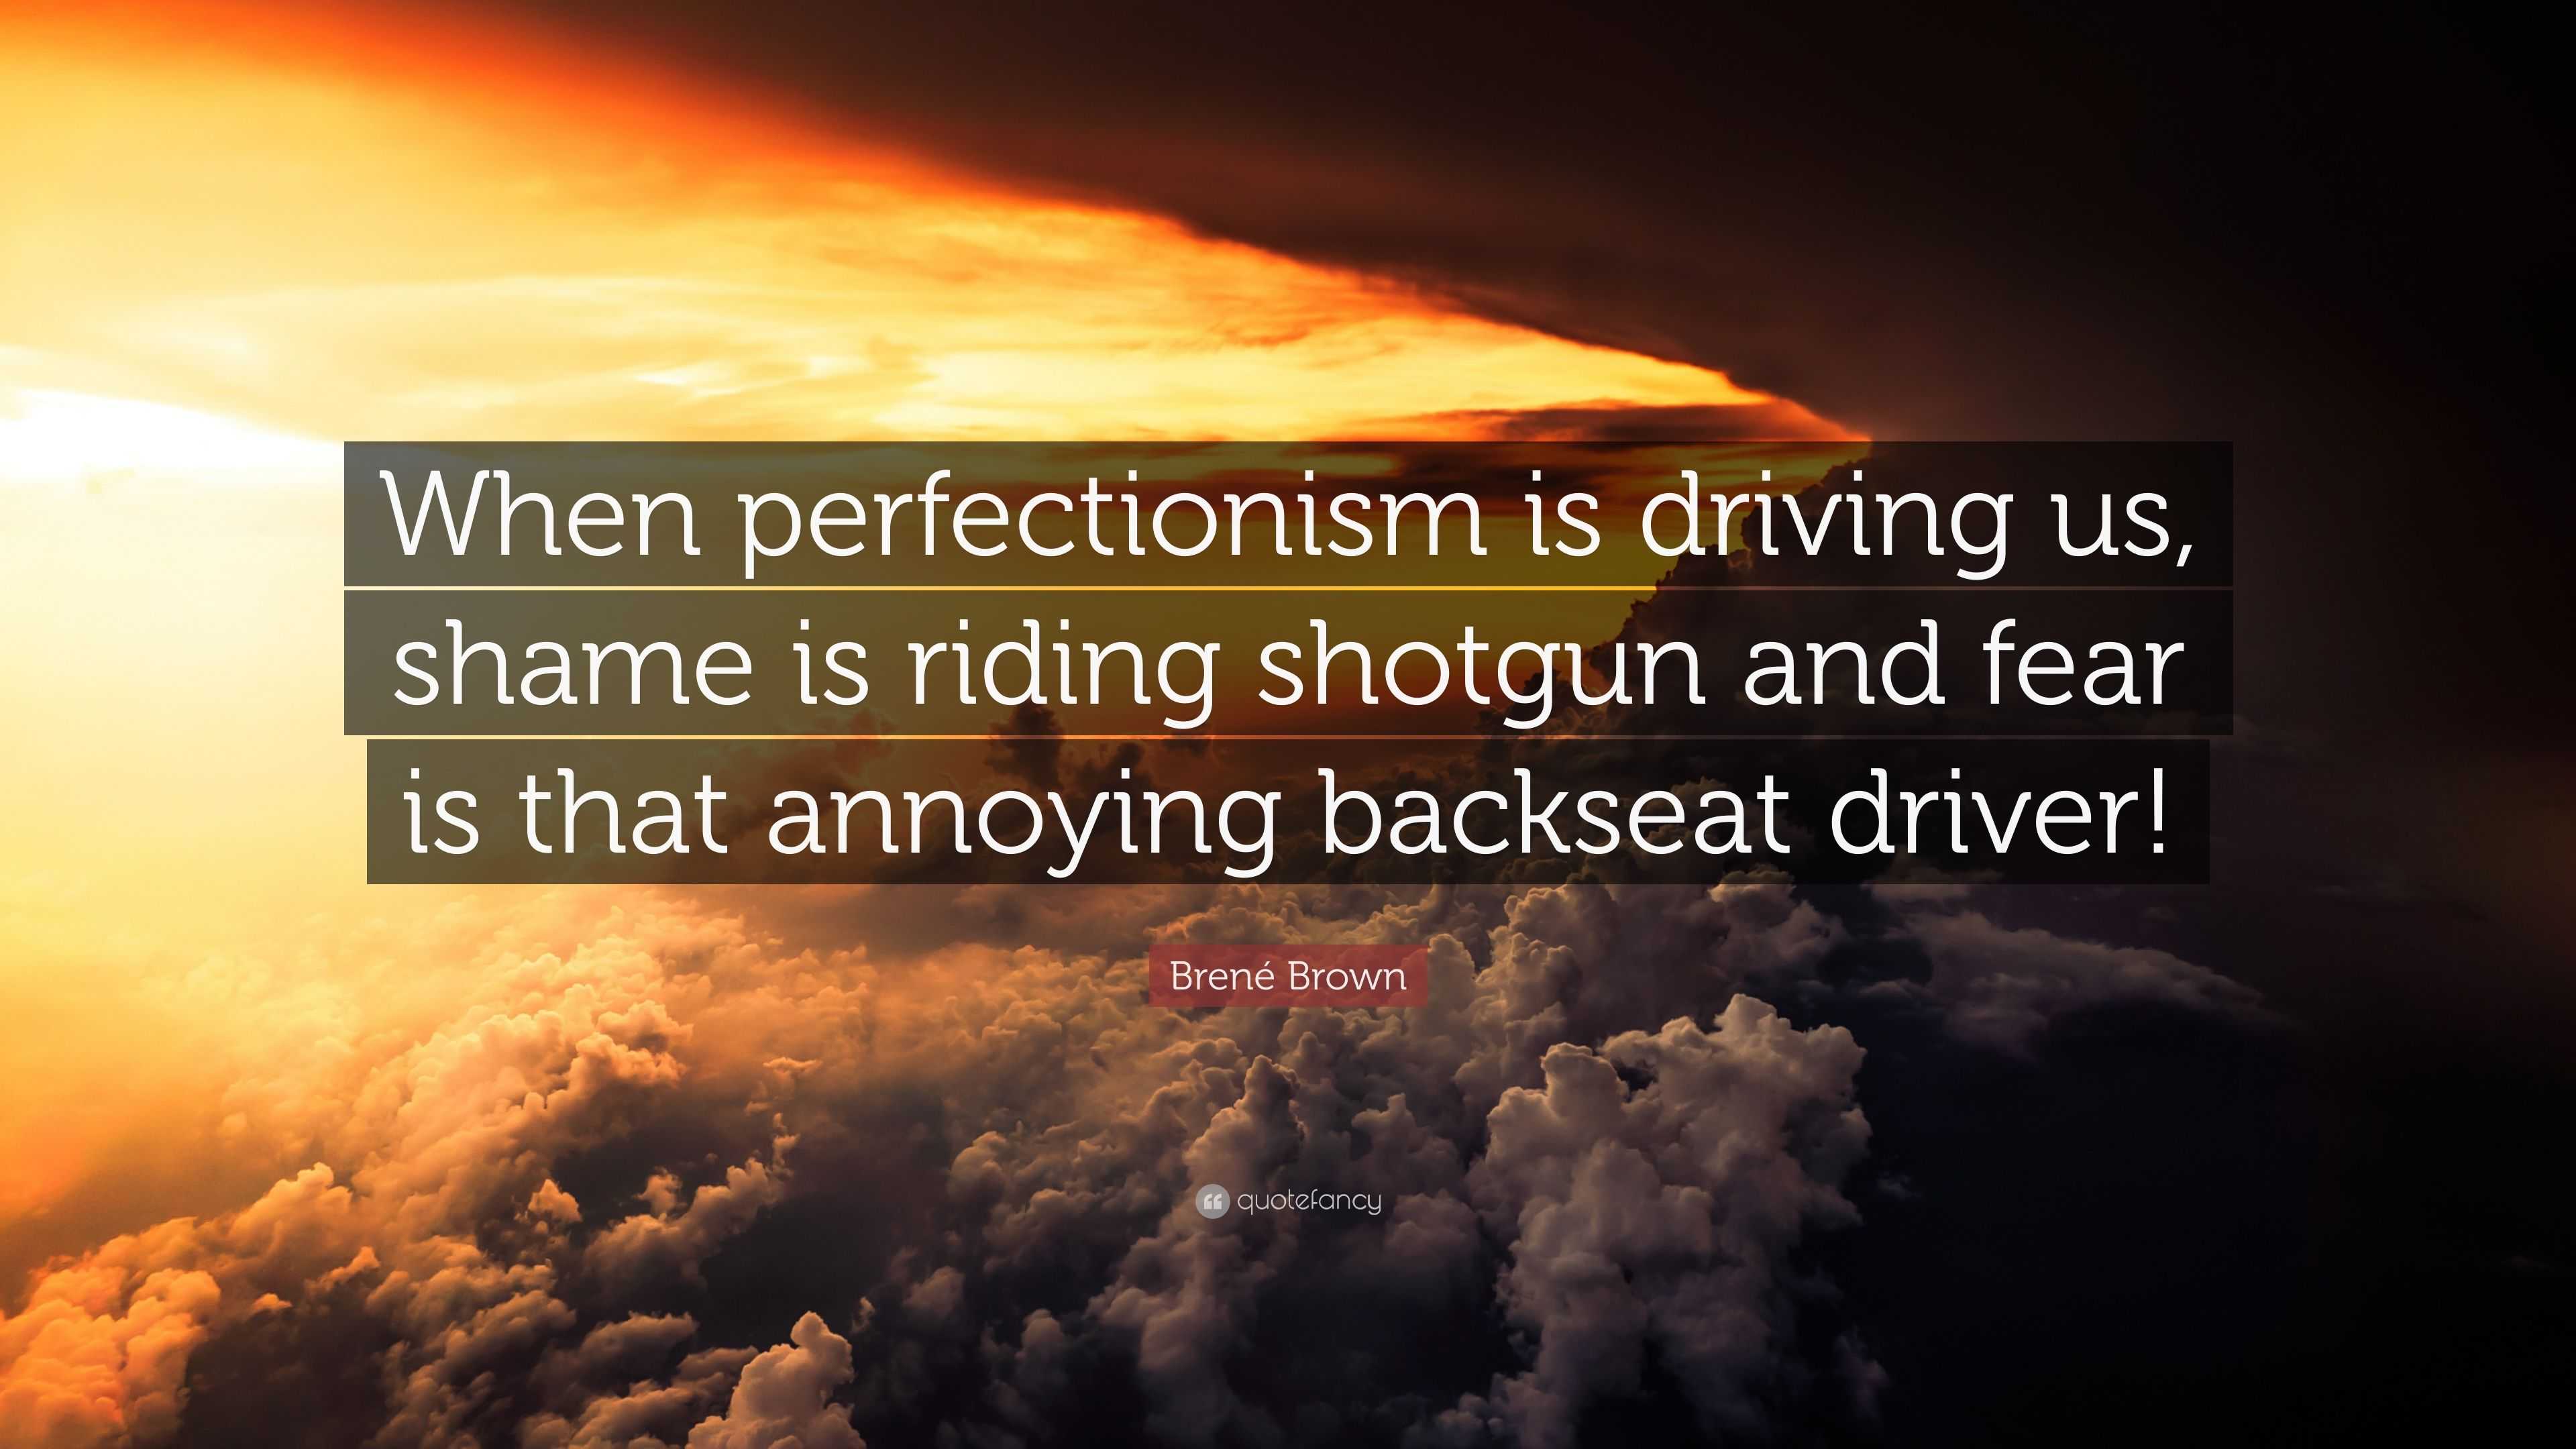 Brené Brown Quote: “When perfectionism is driving us, shame is riding